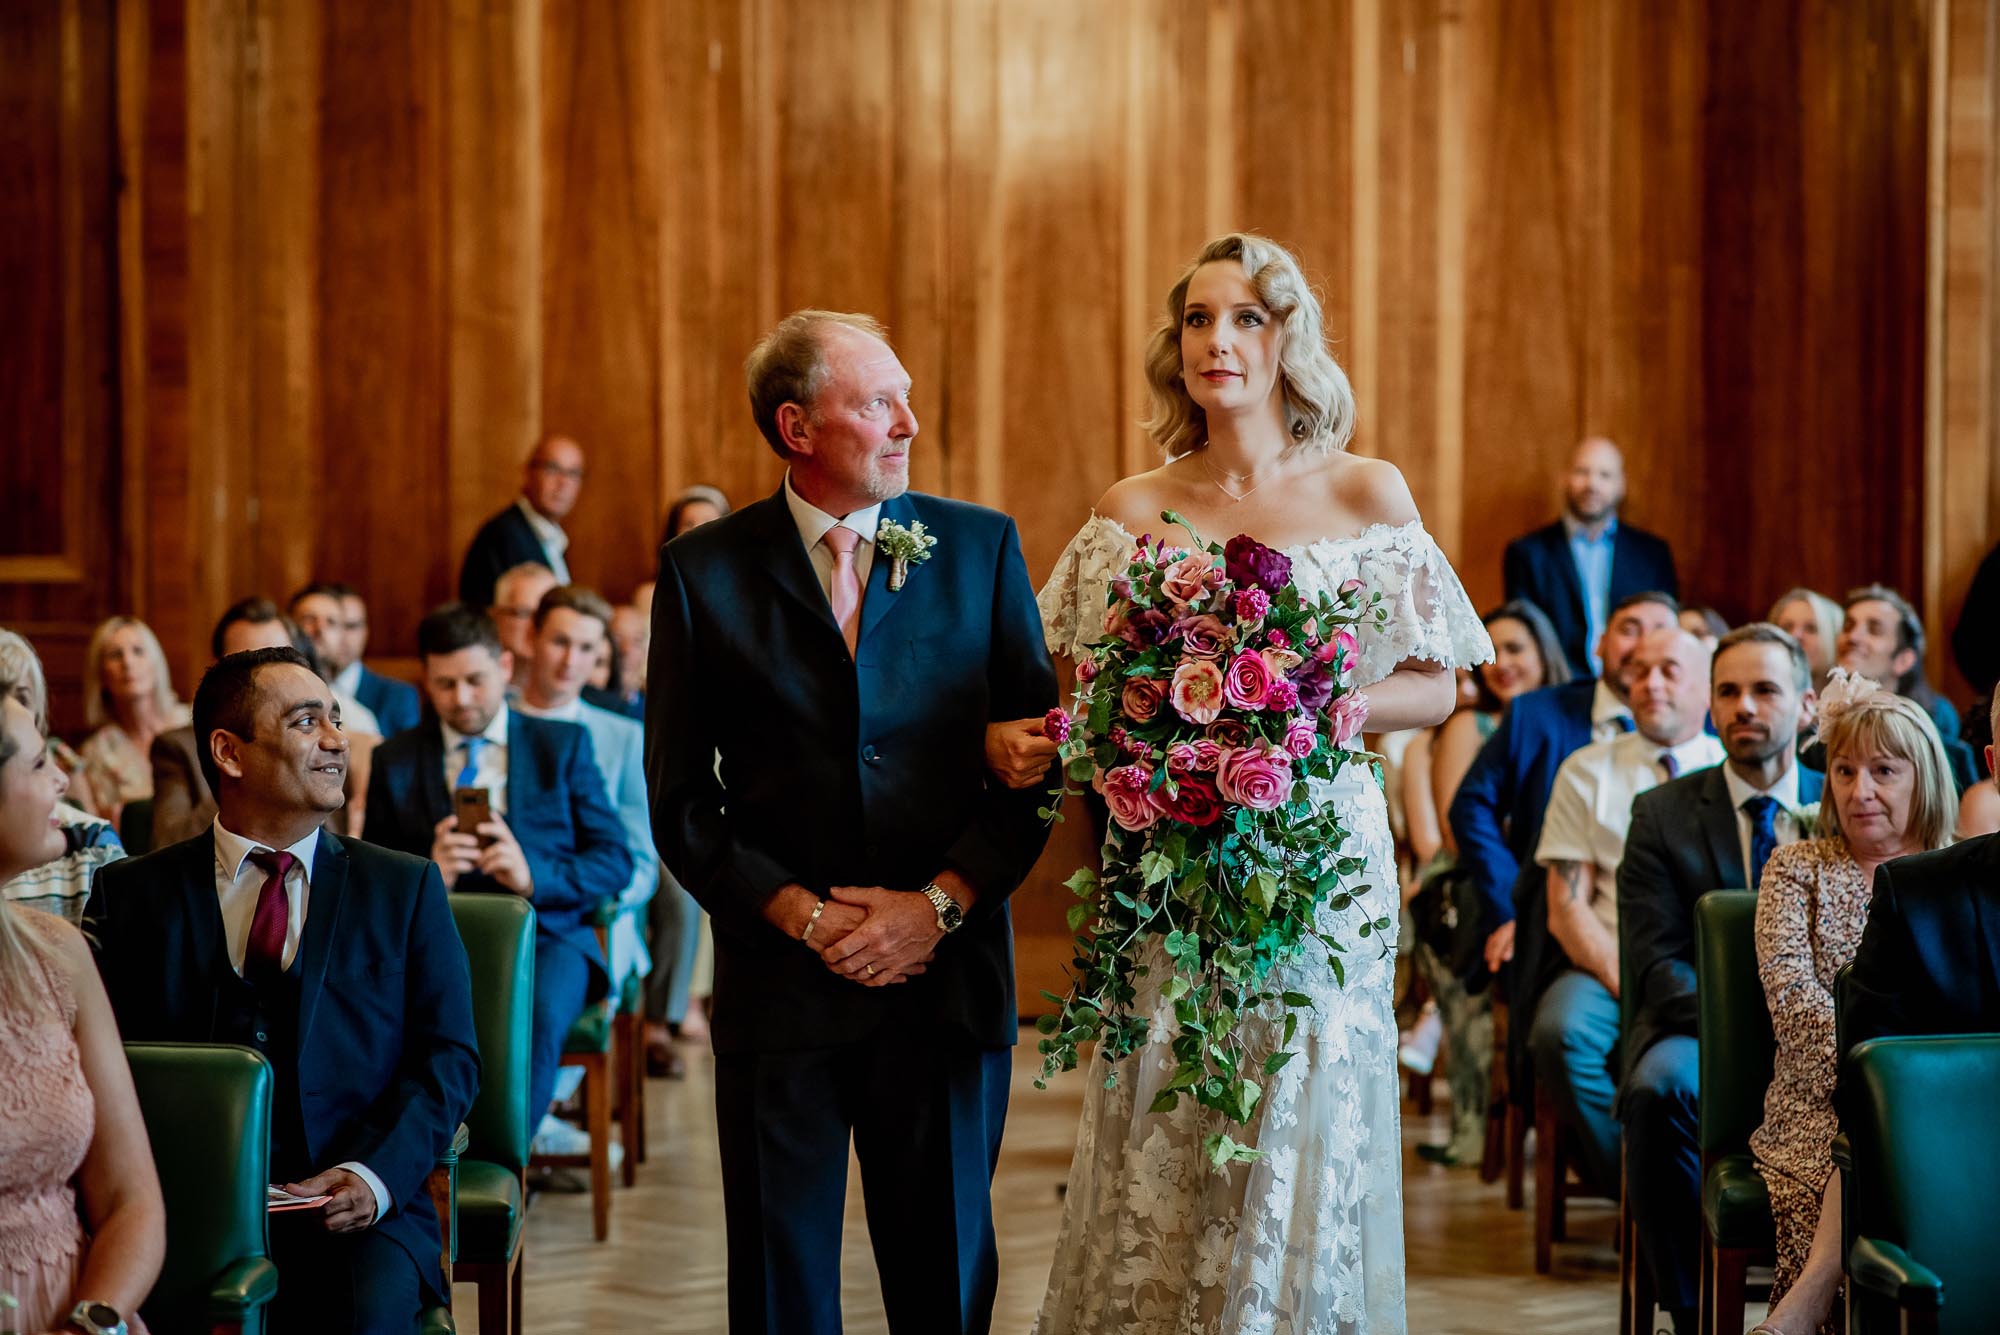 Chris and Sarah's London wedding with vibrant pink florals made by the bride. Photographer credit Damien Vickers Photography